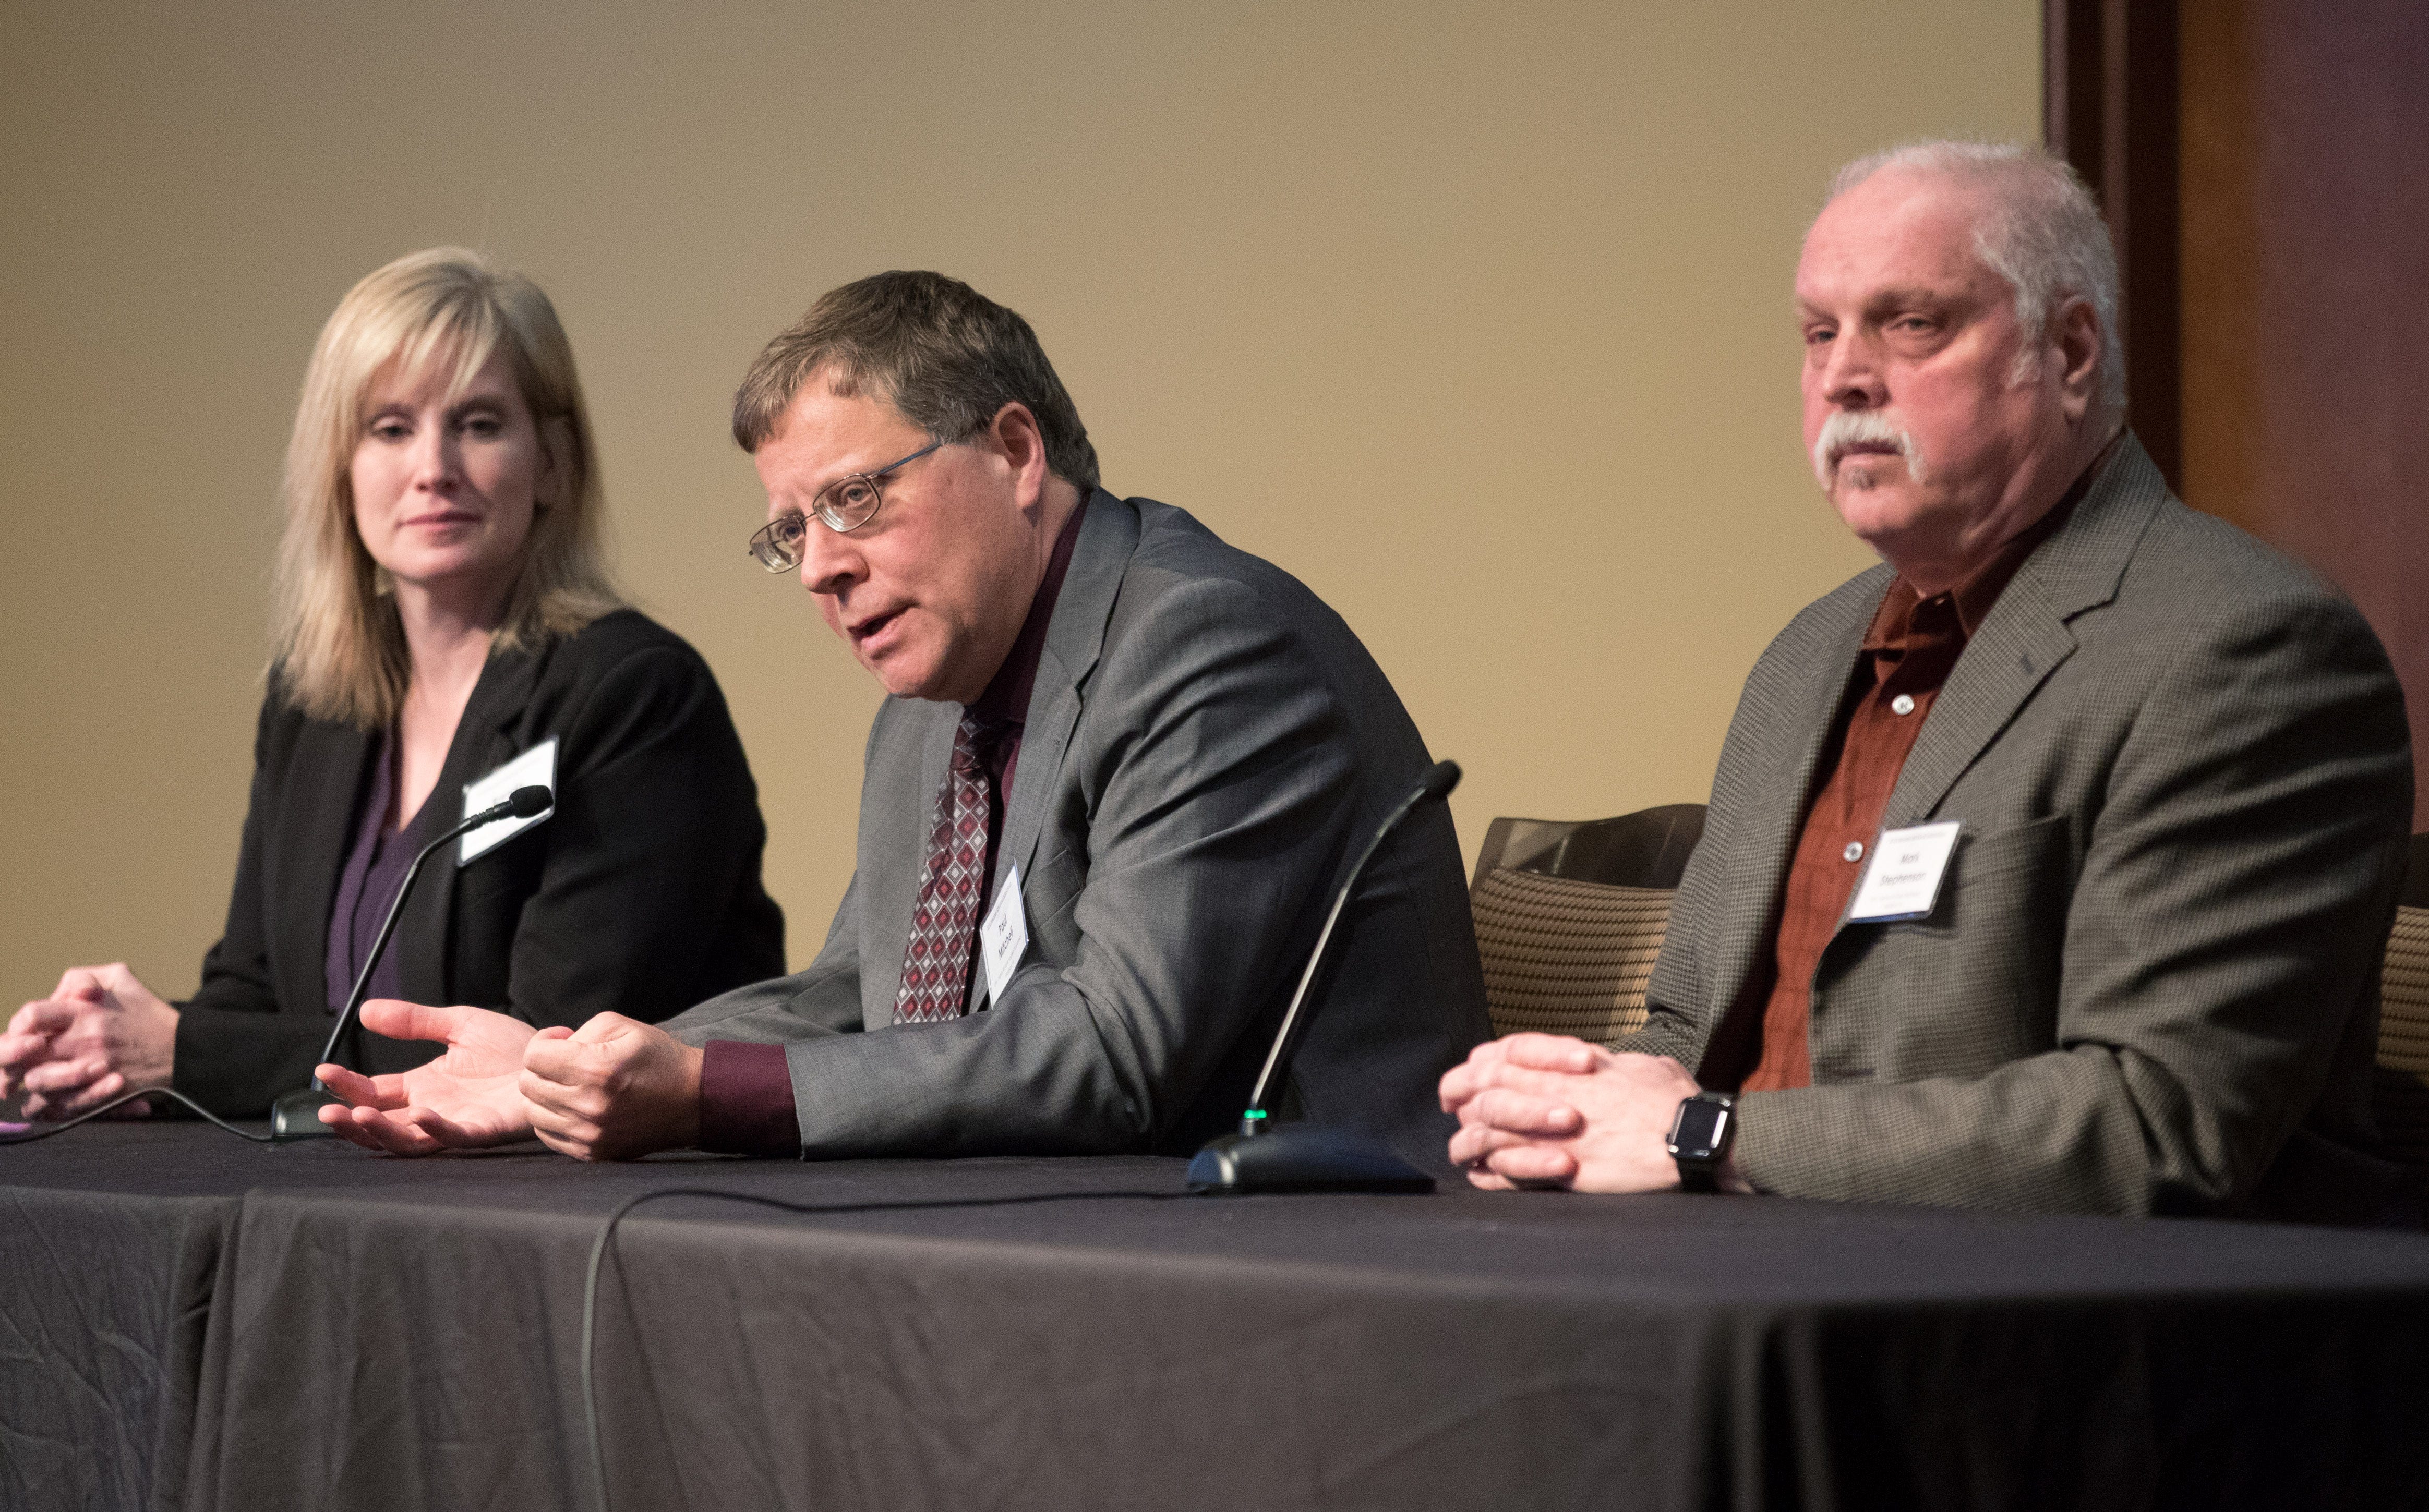 From left, Brenda Boetel, a professor of agricultural economics at UW-River Falls, Paul Mitchell, professor of agricultural and applied economics at UWÐMadison, and  Mark Stephenson, professor of agricultural and applied economics at UWÐMadison, participate in a panel during the 2019 Wisconsin Agricultural Outlook Forum at Union South at UW-Madison in Madison, Wis., Tuesday, Jan. 29, 2019.